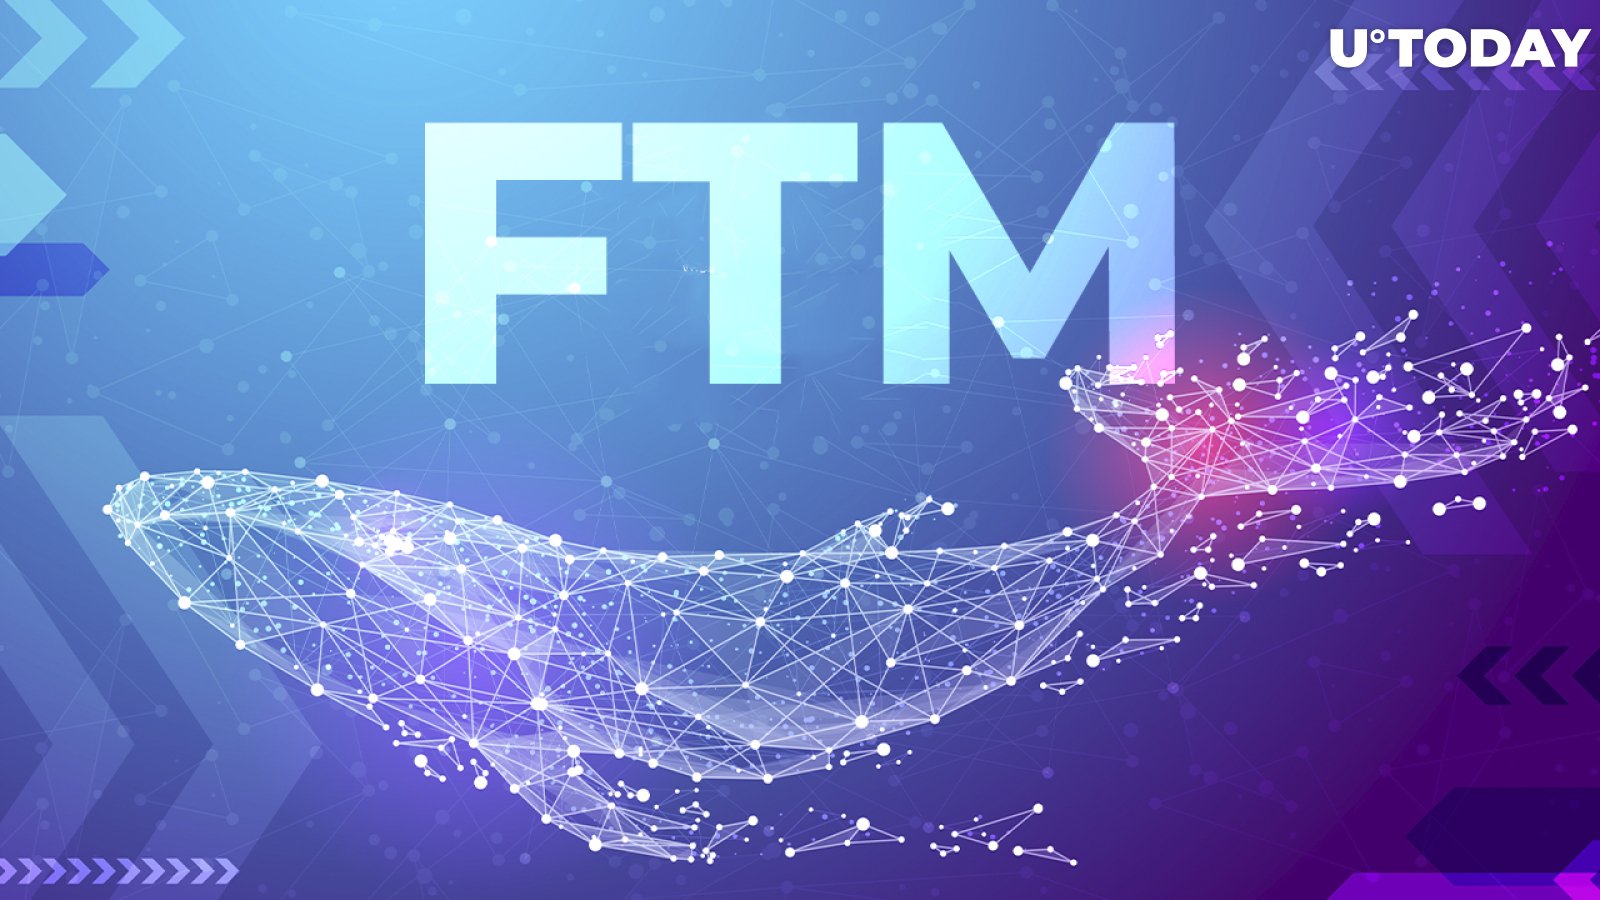 Whales Grab $15 Million Worth of FTM, Here's Why